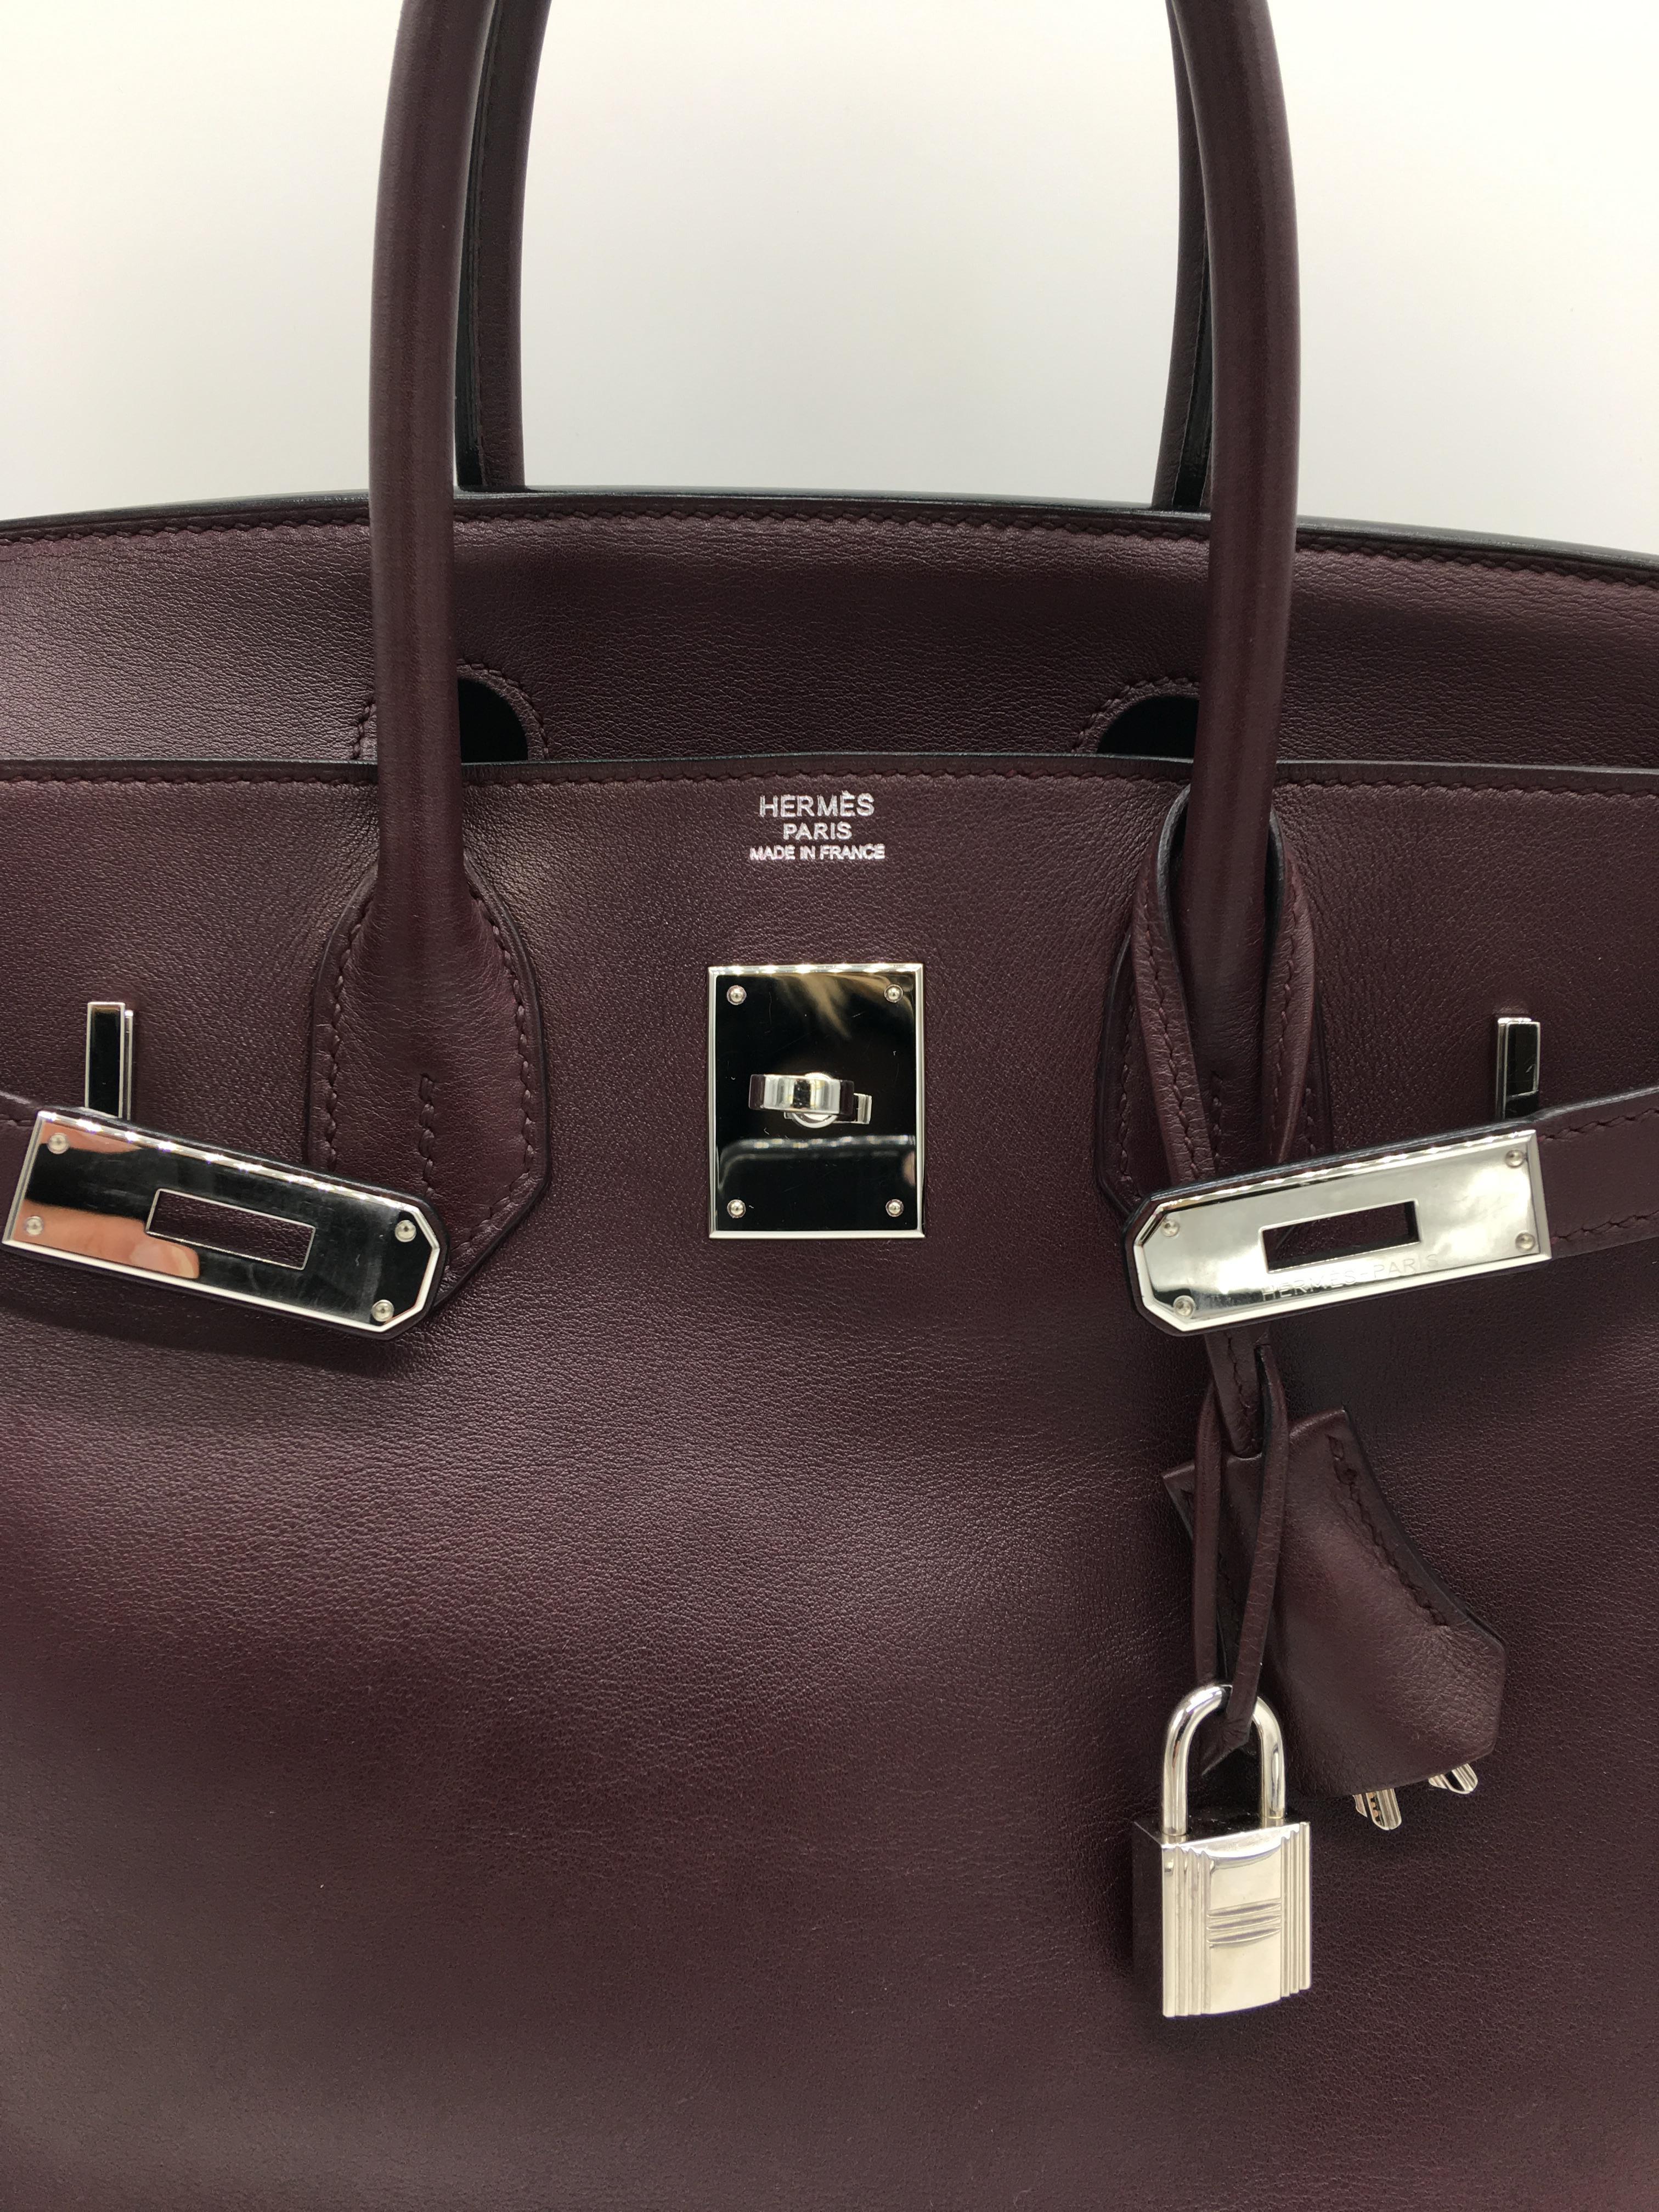 A beautiful Preloved Birkin 30 in Prune which is a great dark colour, more brown than purple but with a hints of red as well.  It’s a lovely alternative to black and equally versatile.  In Swift Leather with Palladium Hardware.
It is L stamp but in